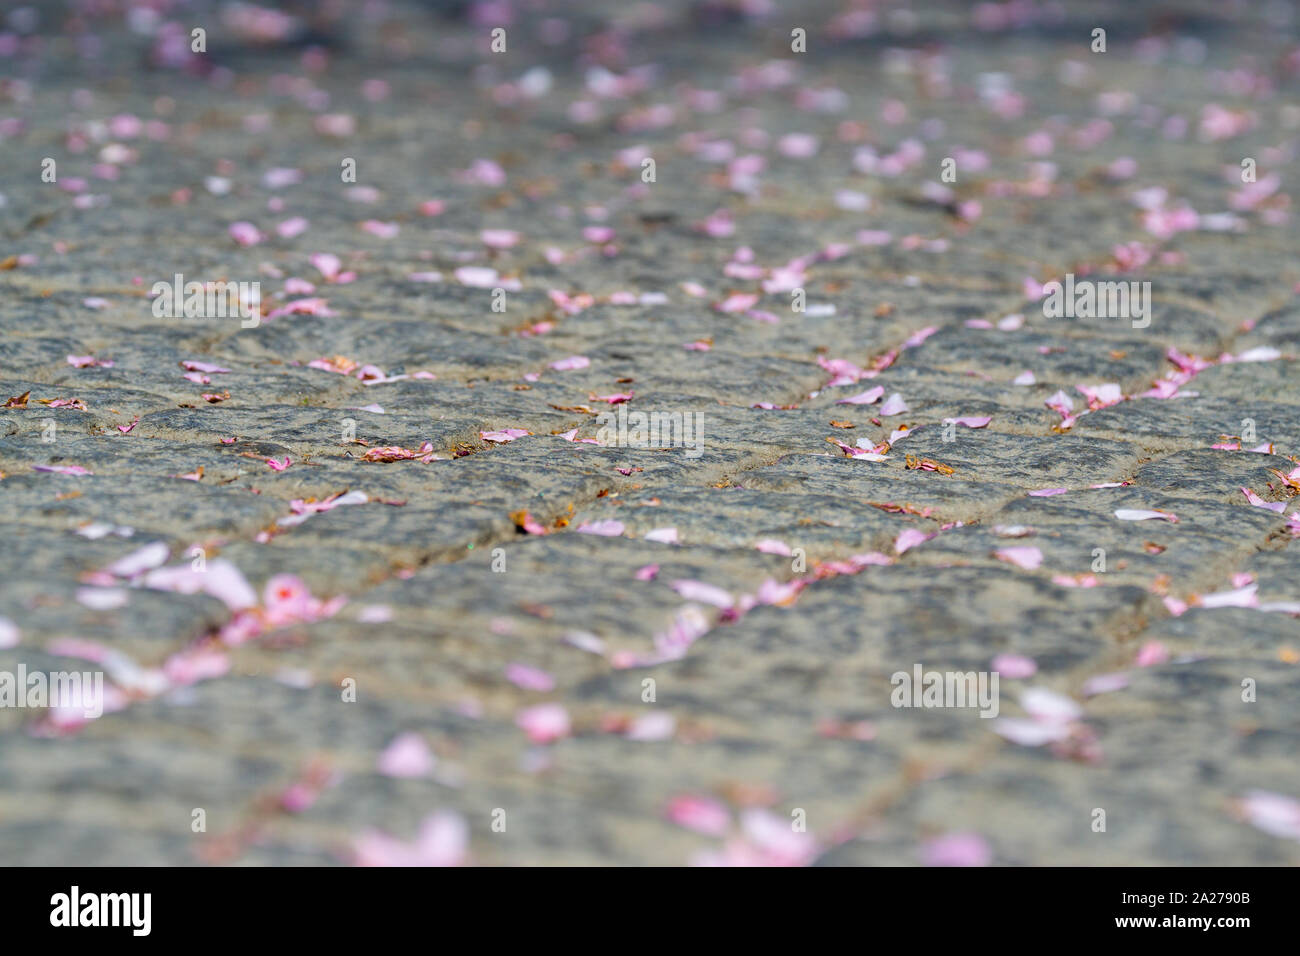 abstract background, flower petals on grey sidewalk Stock Photo